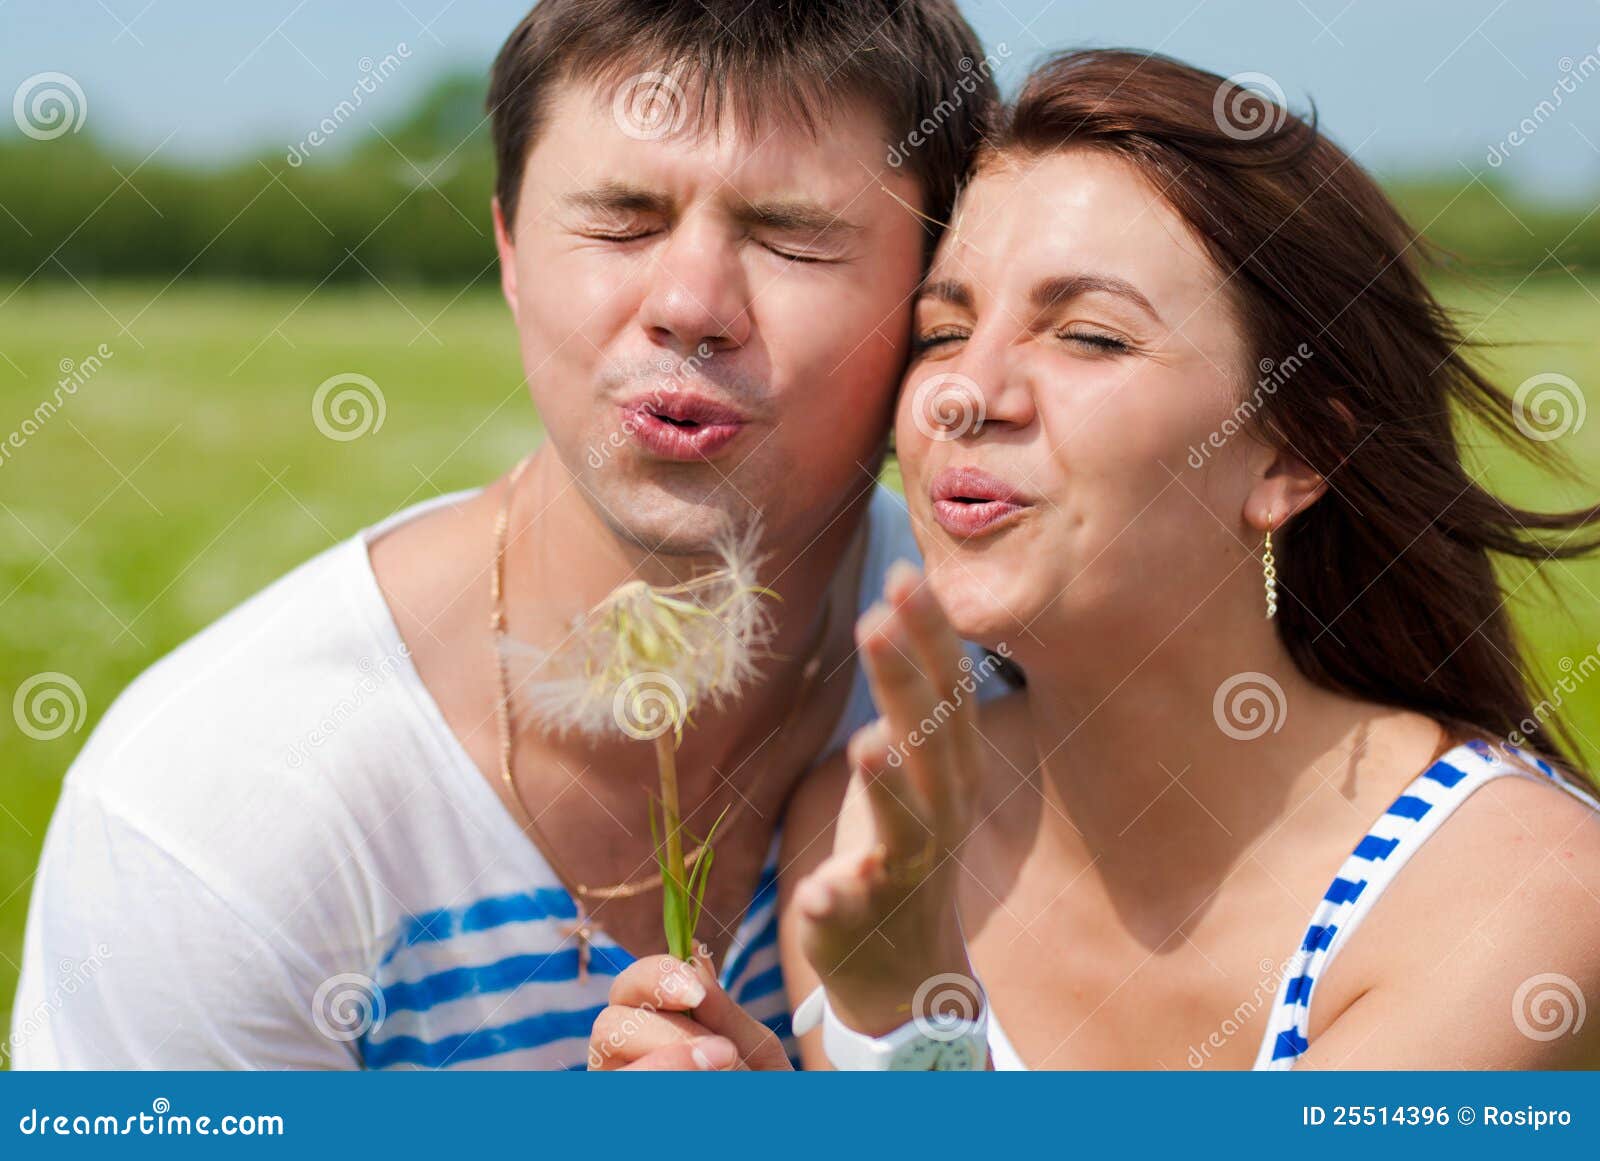 Happy Couple Having Fun Outdoors Stock Photo Image Of Female Excited